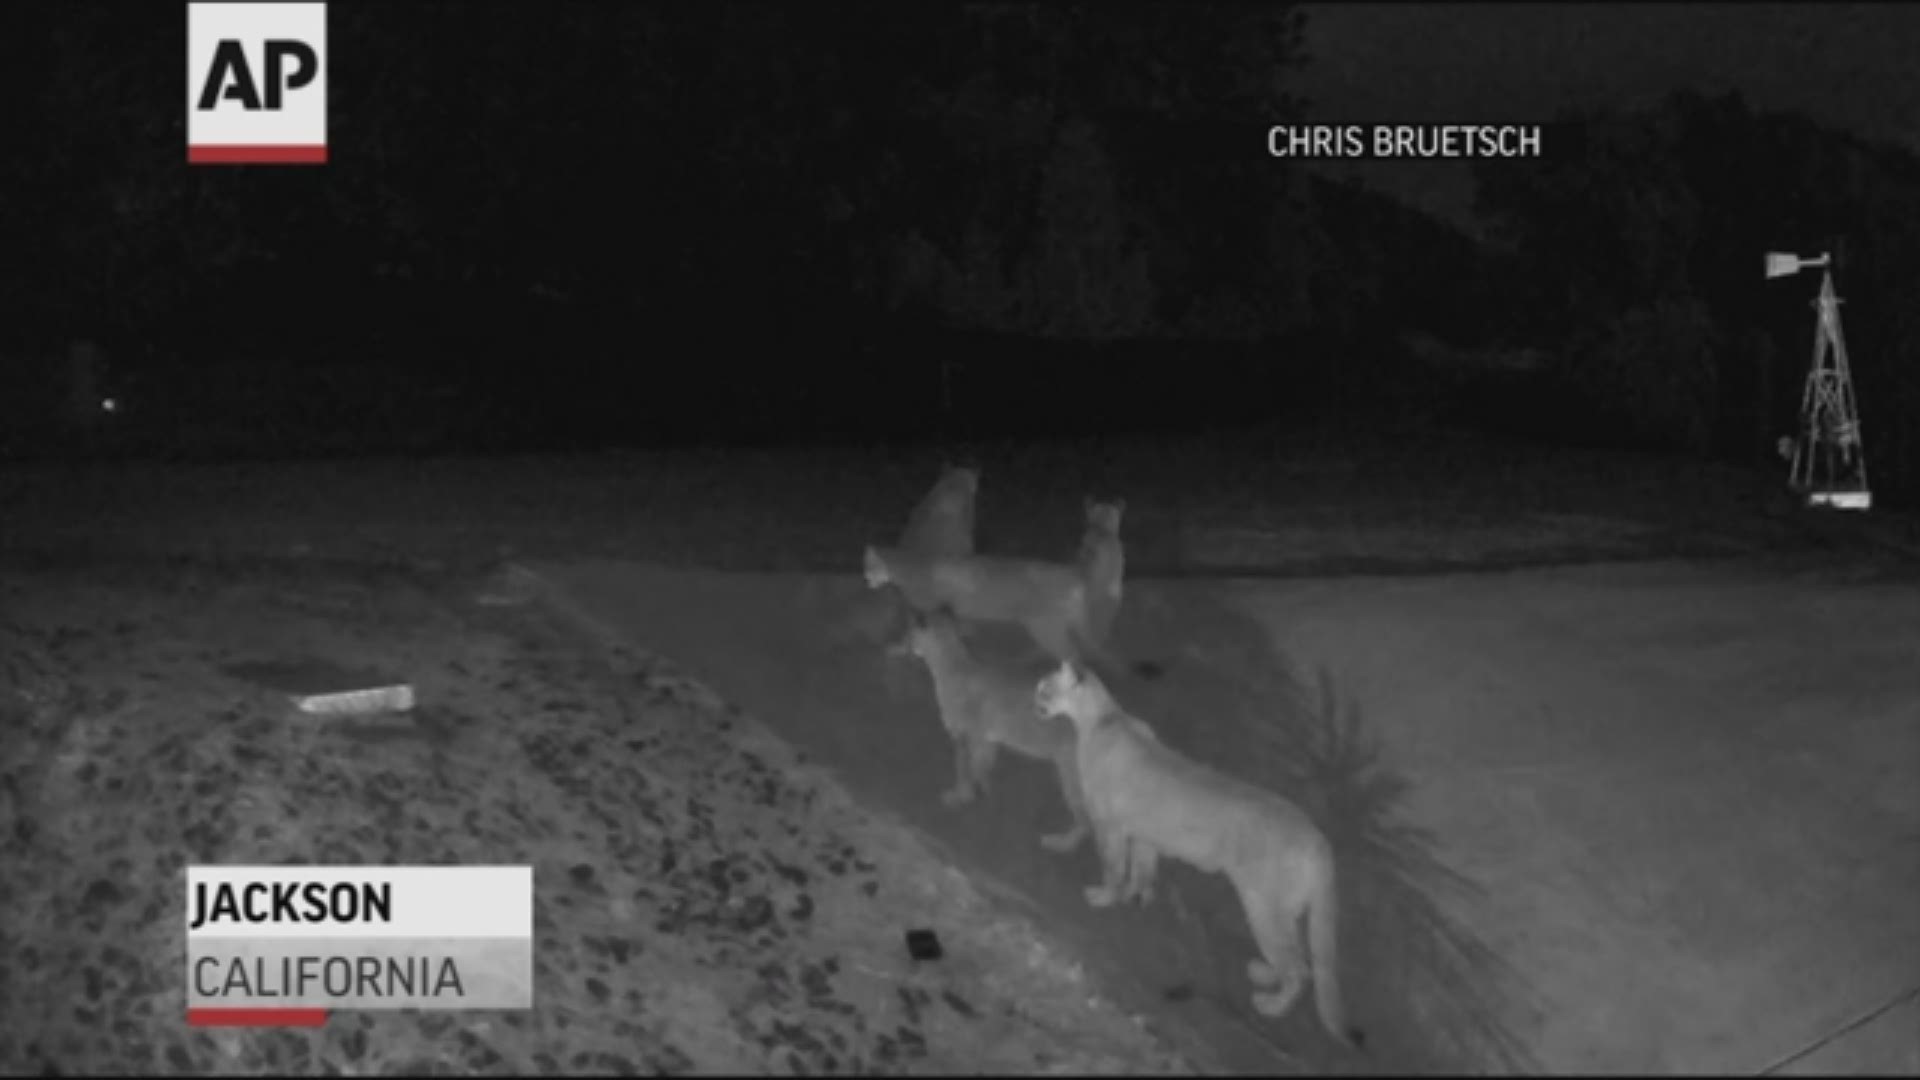 Five California mountain lions were seen together on home surveillance video in a rare gathering of the notoriously solitary big cats.